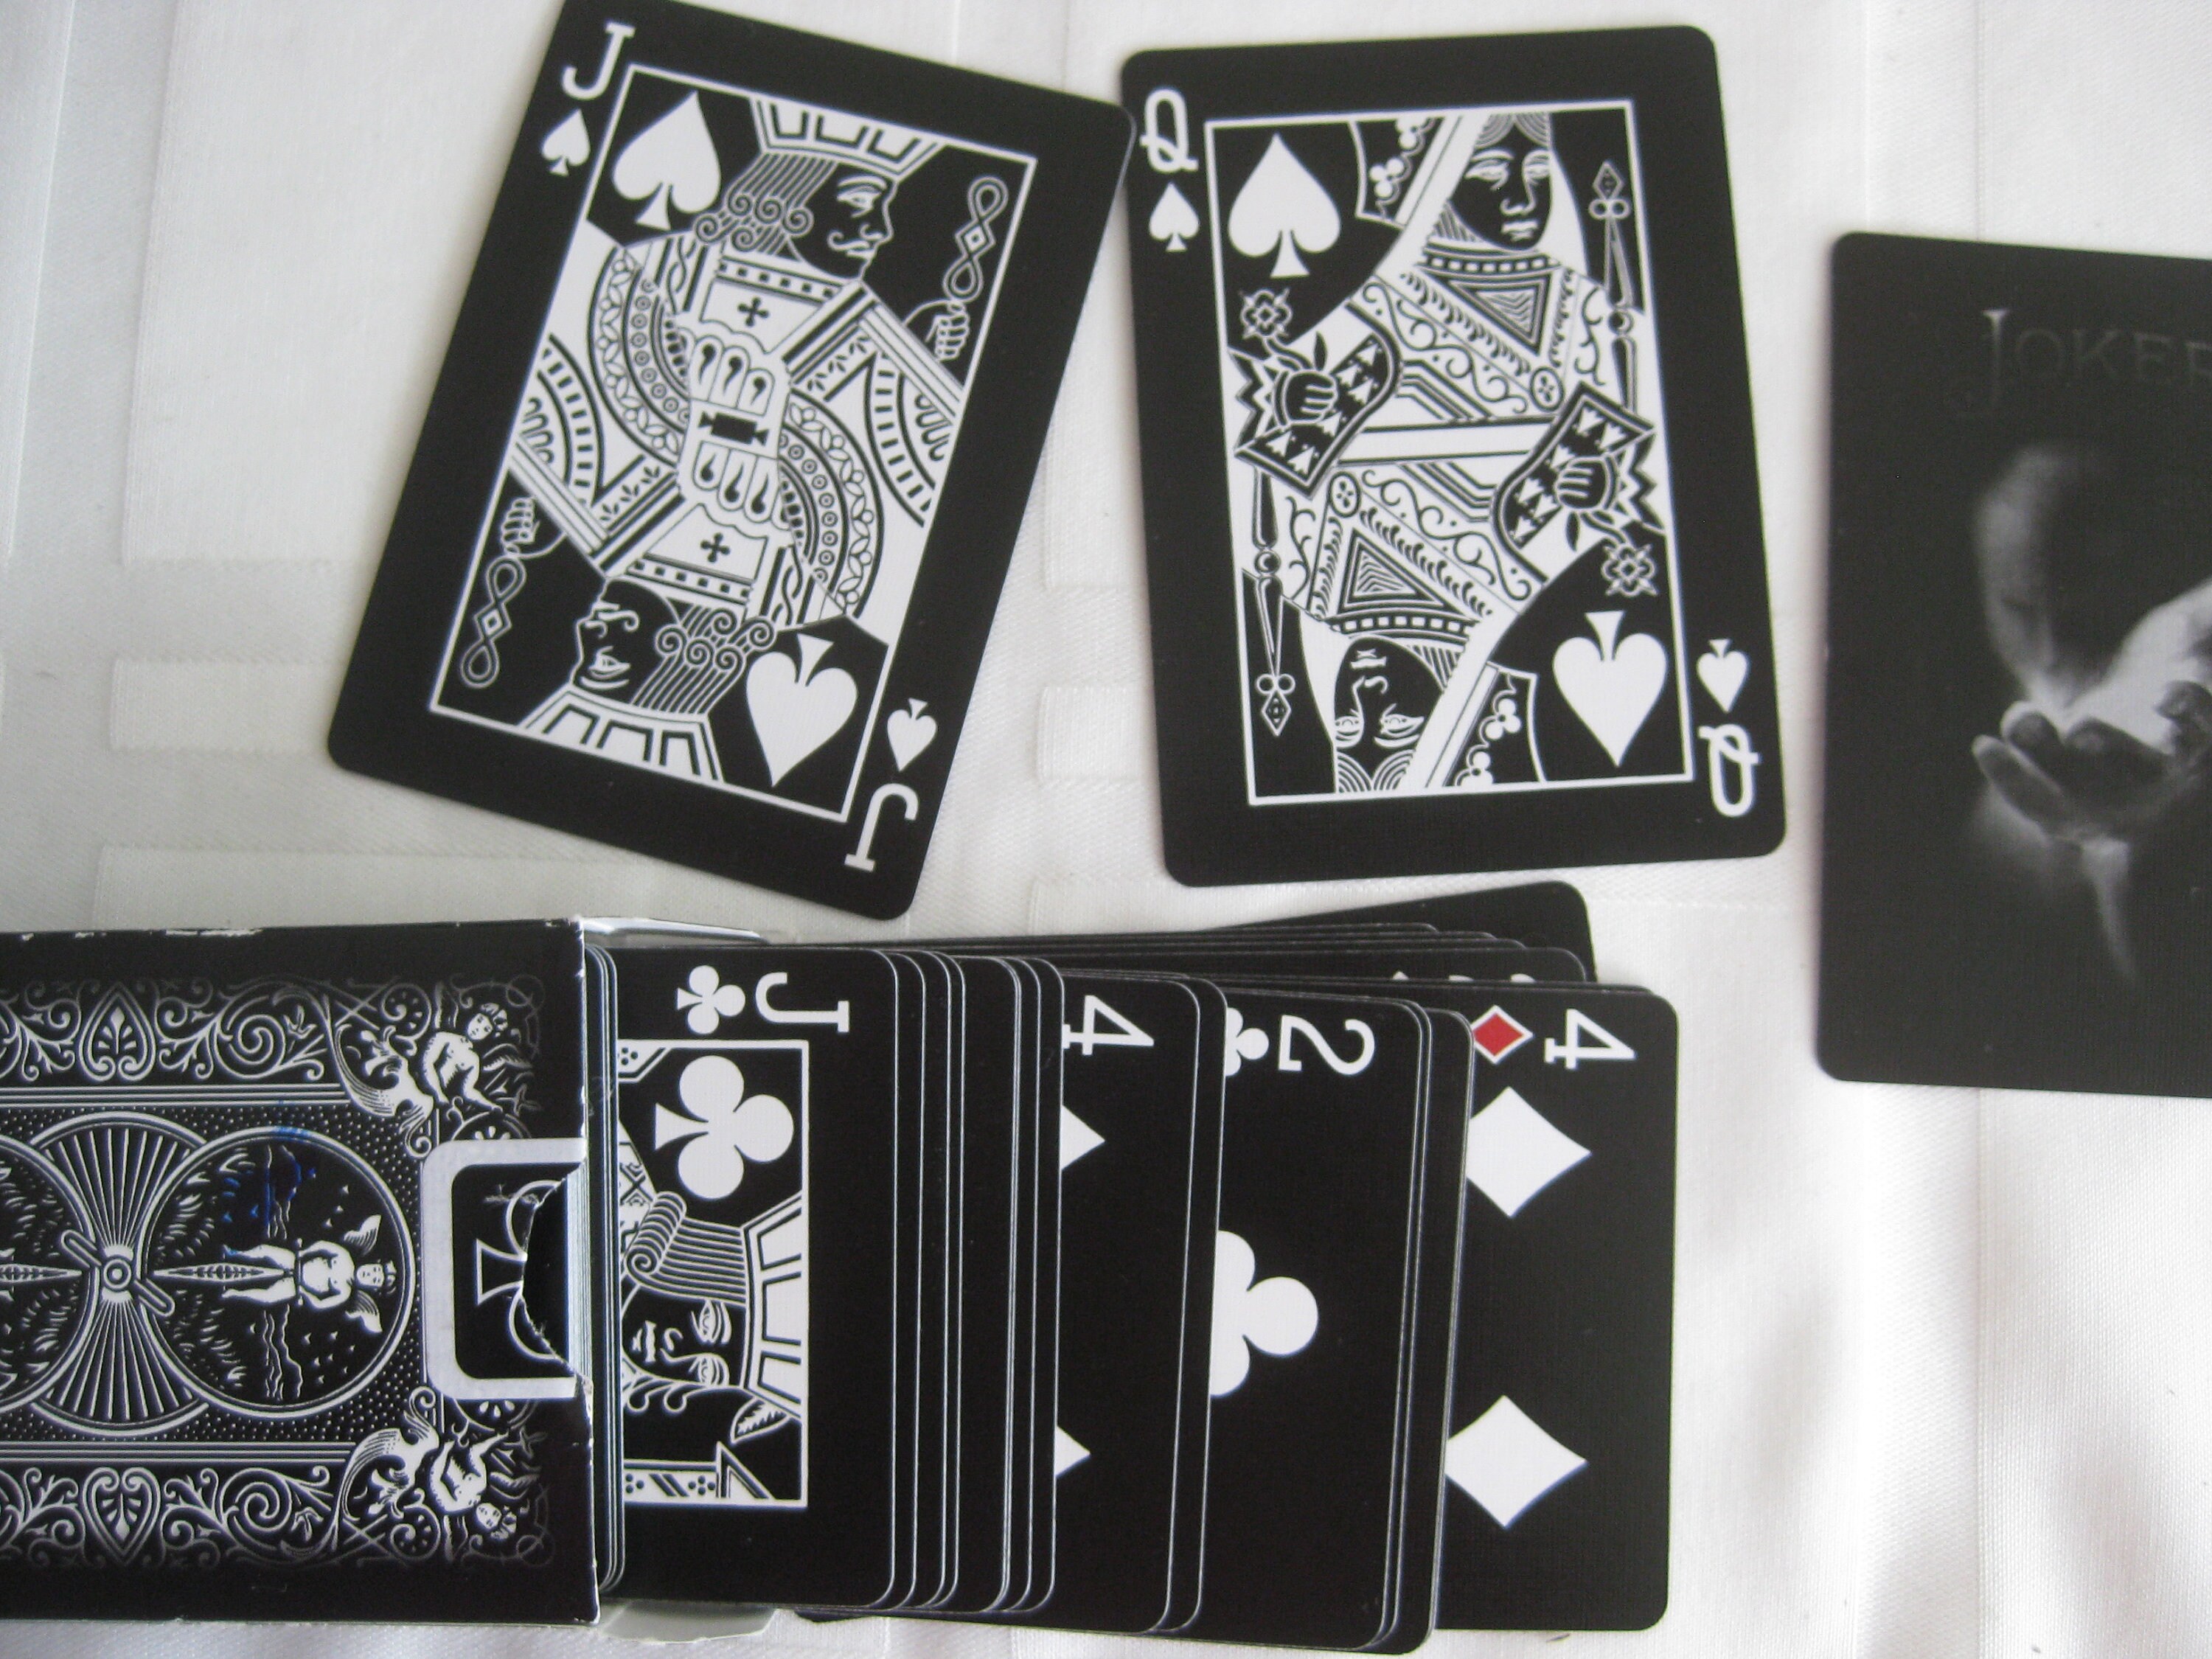 Black Ghost Playing Cards, Full Deck of Black Cards, New in Open Box. Never  Played With. Great Halloween Gift to Keep or to Gift 